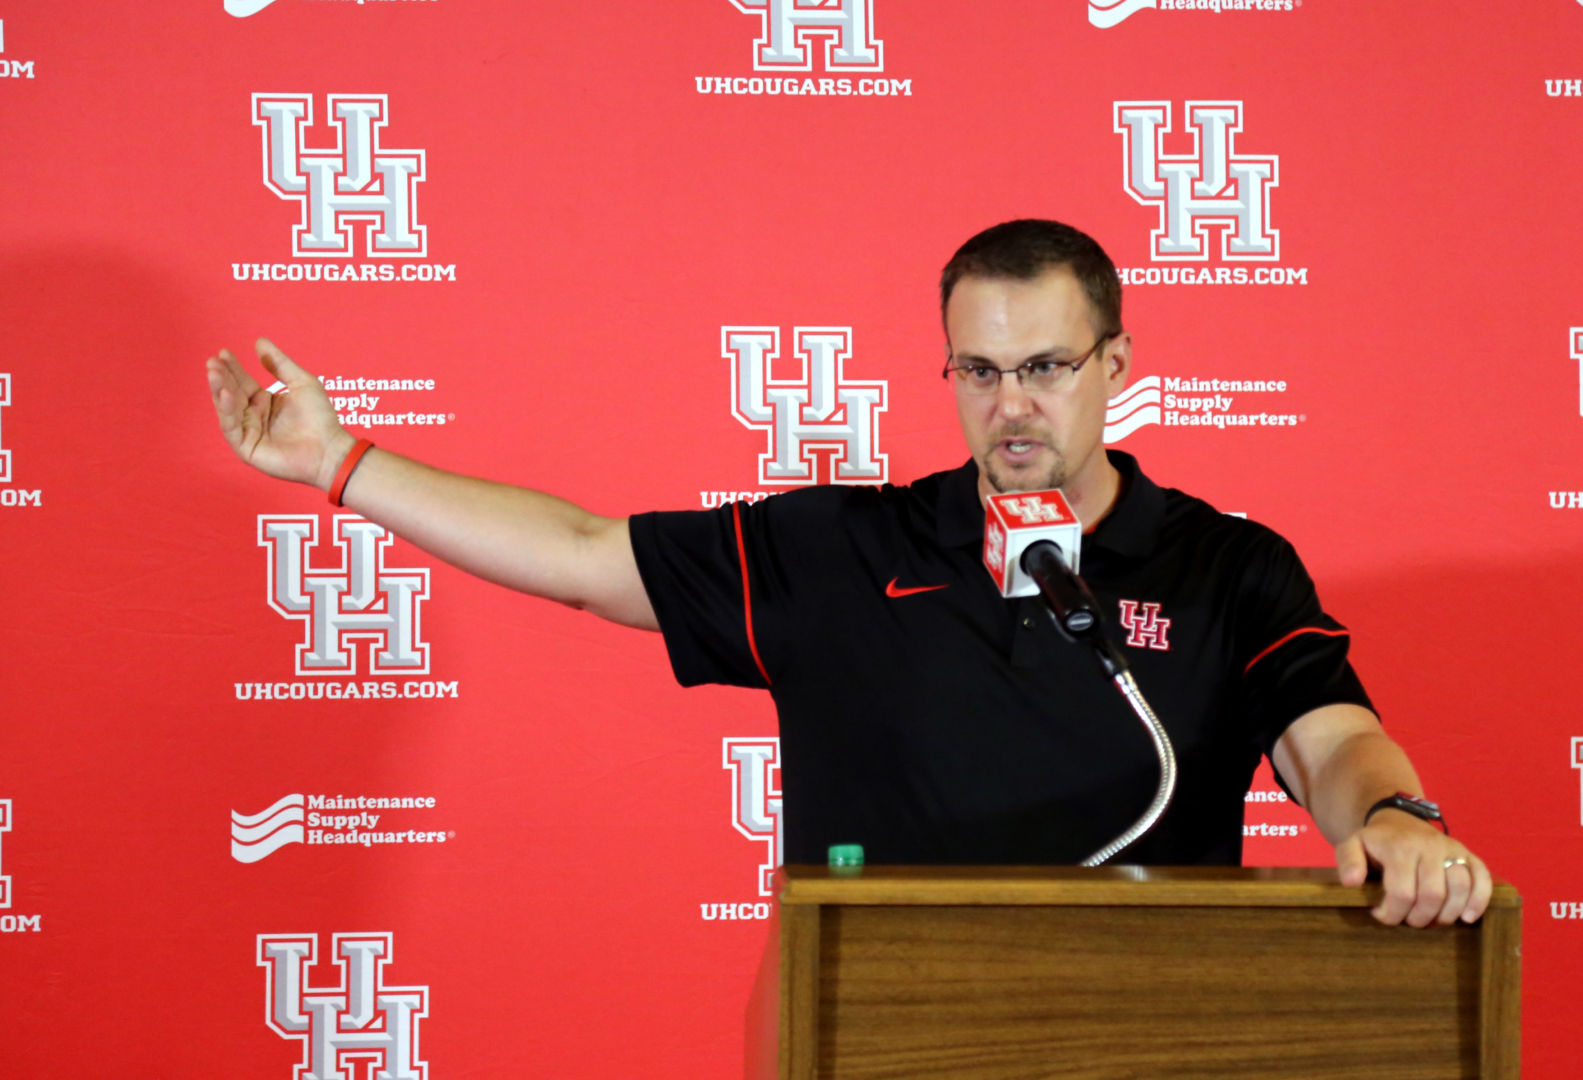 Head coach Tom Herman stressed that every thing is "business as usual" entering the 2016 season. | Reagan Earnst/The Cougar